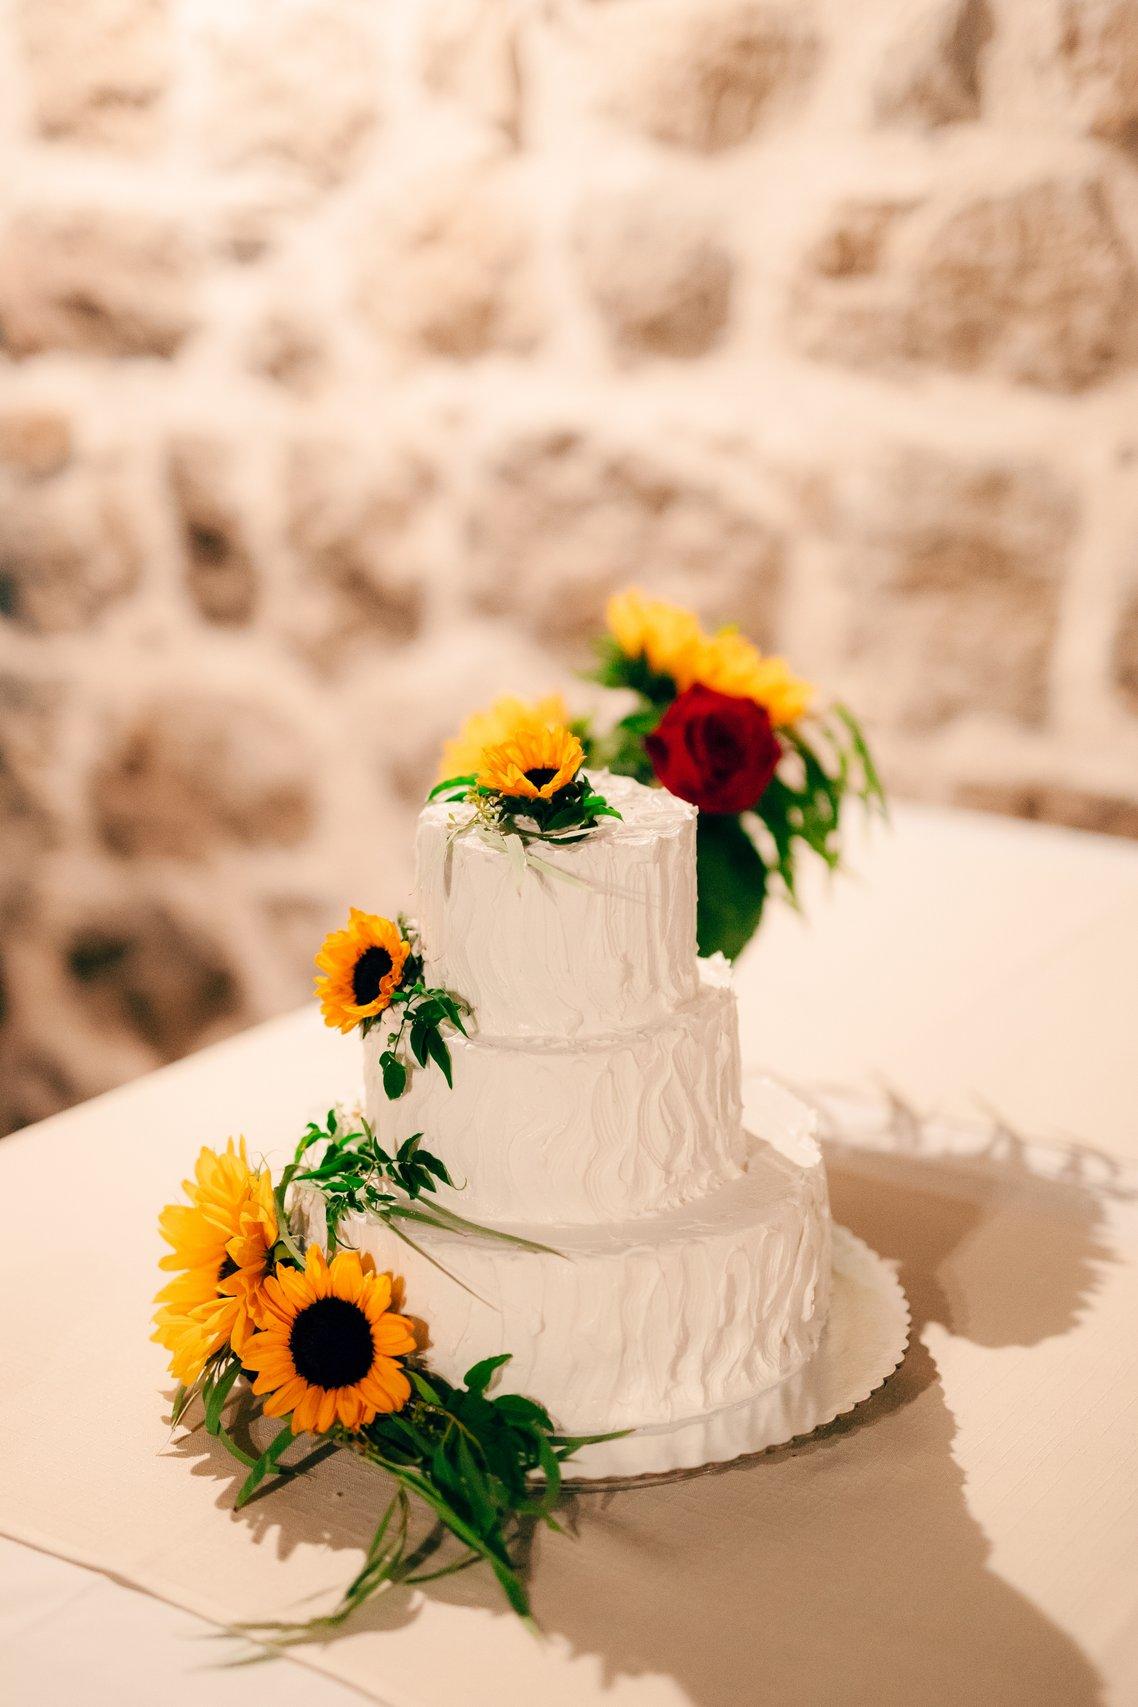 white buttercream wedding cake decorated with yellow sunflowers on each tier